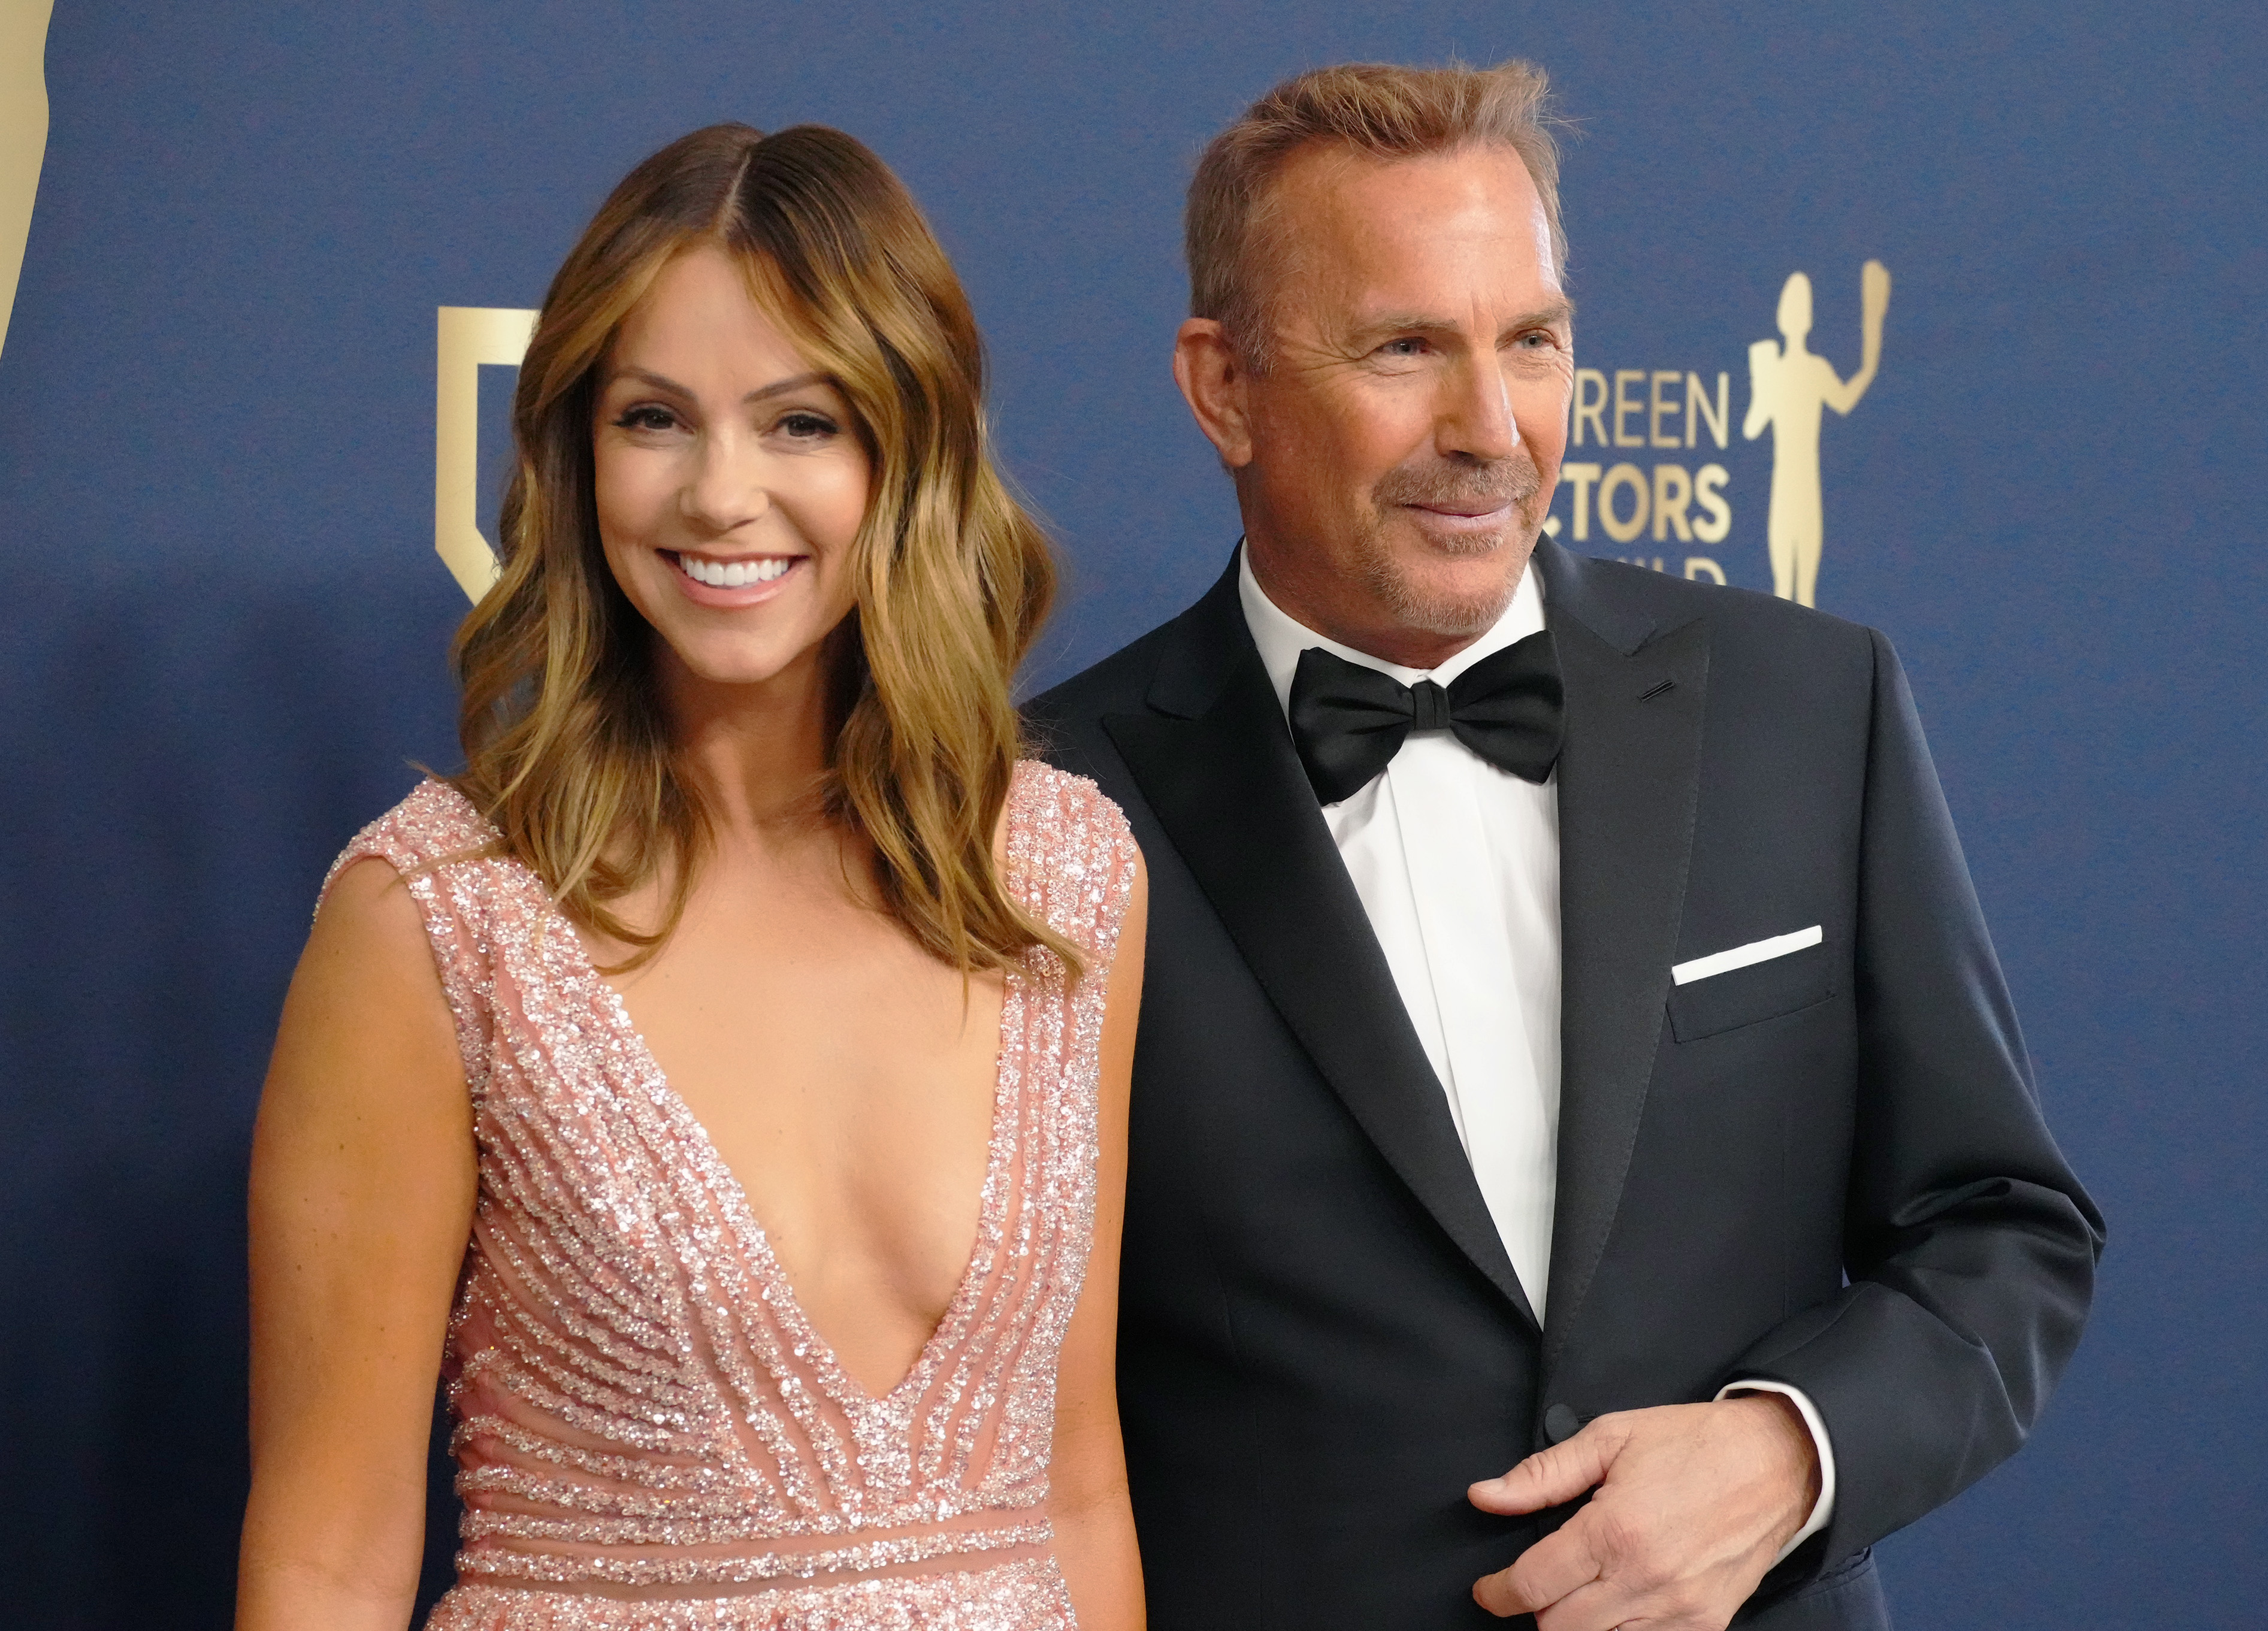 Christine Baumgartner and Kevin Costner at the 28th Annual Screen Actors Guild Awards in Santa Monica, California, on February 27, 2022. | Source: Getty Images